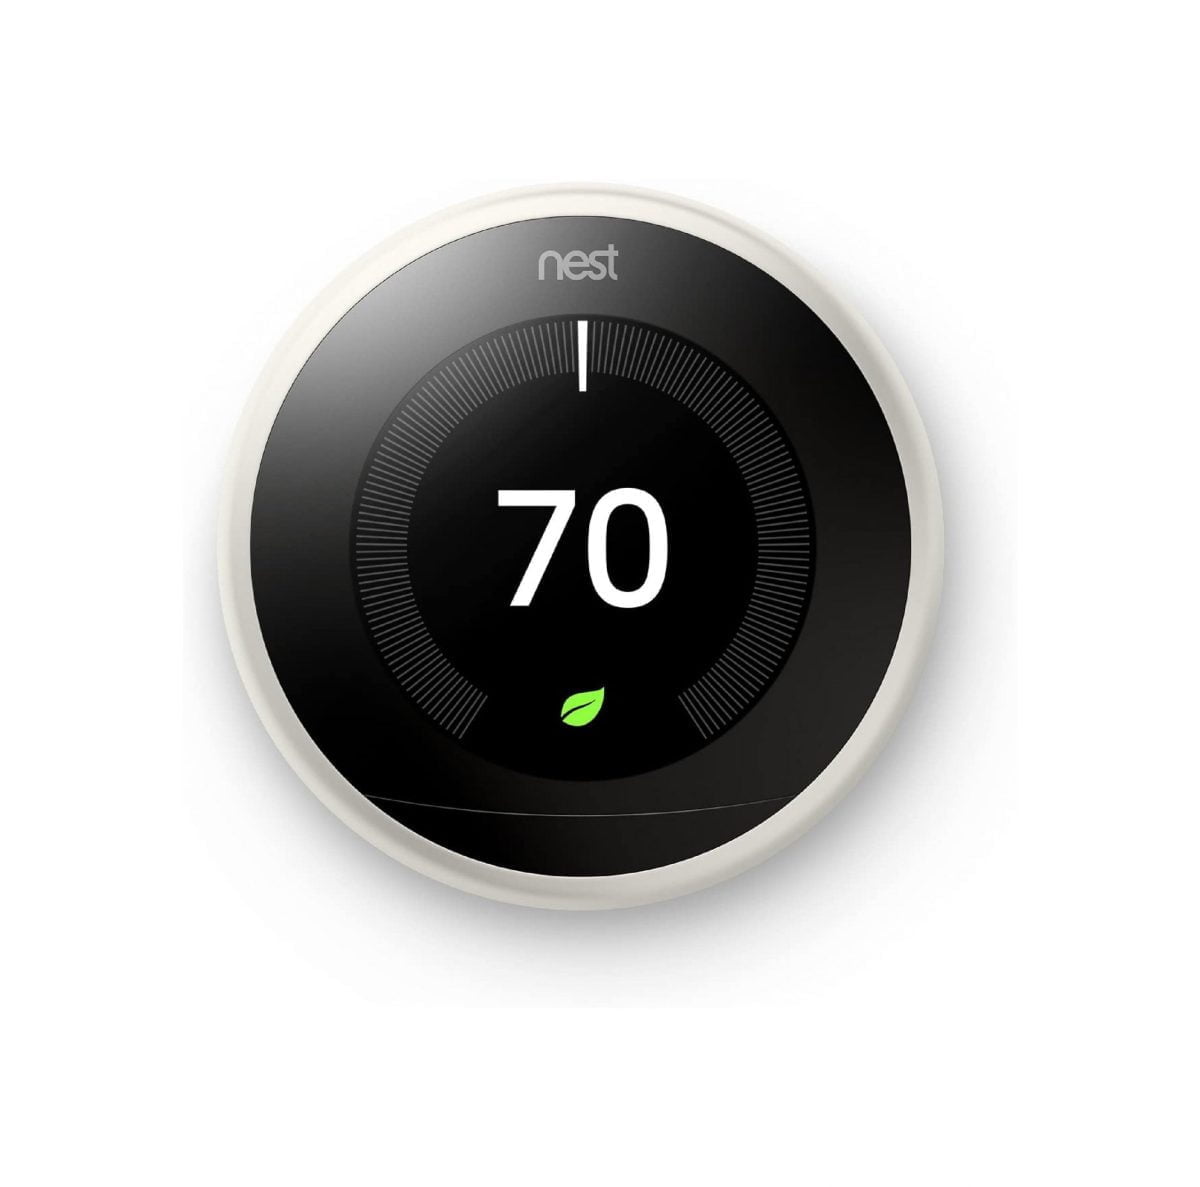 Qwe2 01 Scaled Google &Lt;H1&Gt;Google Nest Learning Smart Wifi Thermostat 3Rd Gen - T3017Us White&Lt;/H1&Gt; &Lt;Ul Class=&Quot;A-Unordered-List A-Vertical A-Spacing-Mini&Quot;&Gt; &Lt;Li&Gt;&Lt;Span Class=&Quot;A-List-Item&Quot;&Gt;Auto-Schedule: No More Confusing Programming. It Learns The Temperatures You Like And Programs Itself.&Lt;/Span&Gt;&Lt;/Li&Gt; &Lt;Li&Gt;&Lt;Span Class=&Quot;A-List-Item&Quot;&Gt;Wi-Fi Thermostat: Connect The Nest Thermostat To Wi-Fi To Change The Temperature From Your Phone, Tablet Or Laptop.&Lt;/Span&Gt;&Lt;/Li&Gt; &Lt;Li&Gt;&Lt;Span Class=&Quot;A-List-Item&Quot;&Gt;Energy Saving: You’ll See The Nest Leaf When You Choose A Temperature That Saves Energy. It Guides You In The Right Direction.&Lt;/Span&Gt;&Lt;/Li&Gt; &Lt;Li&Gt;&Lt;Span Class=&Quot;A-List-Item&Quot;&Gt;Smart Thermostat: Early-On Nest Learns How Your Home Warms Up And Keeps An Eye On The Weather To Get You The Temperature You Want When You Want It.&Lt;/Span&Gt;&Lt;/Li&Gt; &Lt;Li&Gt;&Lt;Span Class=&Quot;A-List-Item&Quot;&Gt;Home/Away Assist: The Nest Thermostat Automatically Turns Itself Down When You’re Away To Avoid Heating Or Cooling An Empty Home.&Lt;/Span&Gt;&Lt;/Li&Gt; &Lt;Li&Gt;&Lt;Span Class=&Quot;A-List-Item&Quot;&Gt;Works With Amazon Alexa For Voice Control (Alexa Device Sold Separately)&Lt;/Span&Gt;&Lt;/Li&Gt; &Lt;Li&Gt;&Lt;Span Class=&Quot;A-List-Item&Quot;&Gt;Auto-Schedule: Nest Learns The Temperatures You Like And Programs Itself In About A Week.&Lt;/Span&Gt;&Lt;/Li&Gt; &Lt;/Ul&Gt; &Lt;H5&Gt;Note : Direct Replacement Warranty One Year&Lt;/H5&Gt; &Lt;Div Class=&Quot;Html-Fragment&Quot;&Gt; &Lt;Div&Gt; &Lt;B&Gt;We Also Provide International Wholesale And Retail Shipping To All Gcc Countries: Saudi Arabia, Qatar, Oman, Kuwait, Bahrain.&Lt;/B&Gt; &Lt;/Div&Gt; &Lt;/Div&Gt; &Lt;Div Class=&Quot;A-Row A-Expander-Container A-Expander-Inline-Container&Quot; Aria-Live=&Quot;Polite&Quot;&Gt; &Lt;Div Class=&Quot;A-Expander-Content A-Expander-Extend-Content A-Expander-Content-Expanded&Quot; Aria-Expanded=&Quot;True&Quot;&Gt;&Lt;/Div&Gt; &Lt;/Div&Gt; Thermostat Google Nest Learning Smart Wifi Thermostat 3Rd Gen - T3017Us White